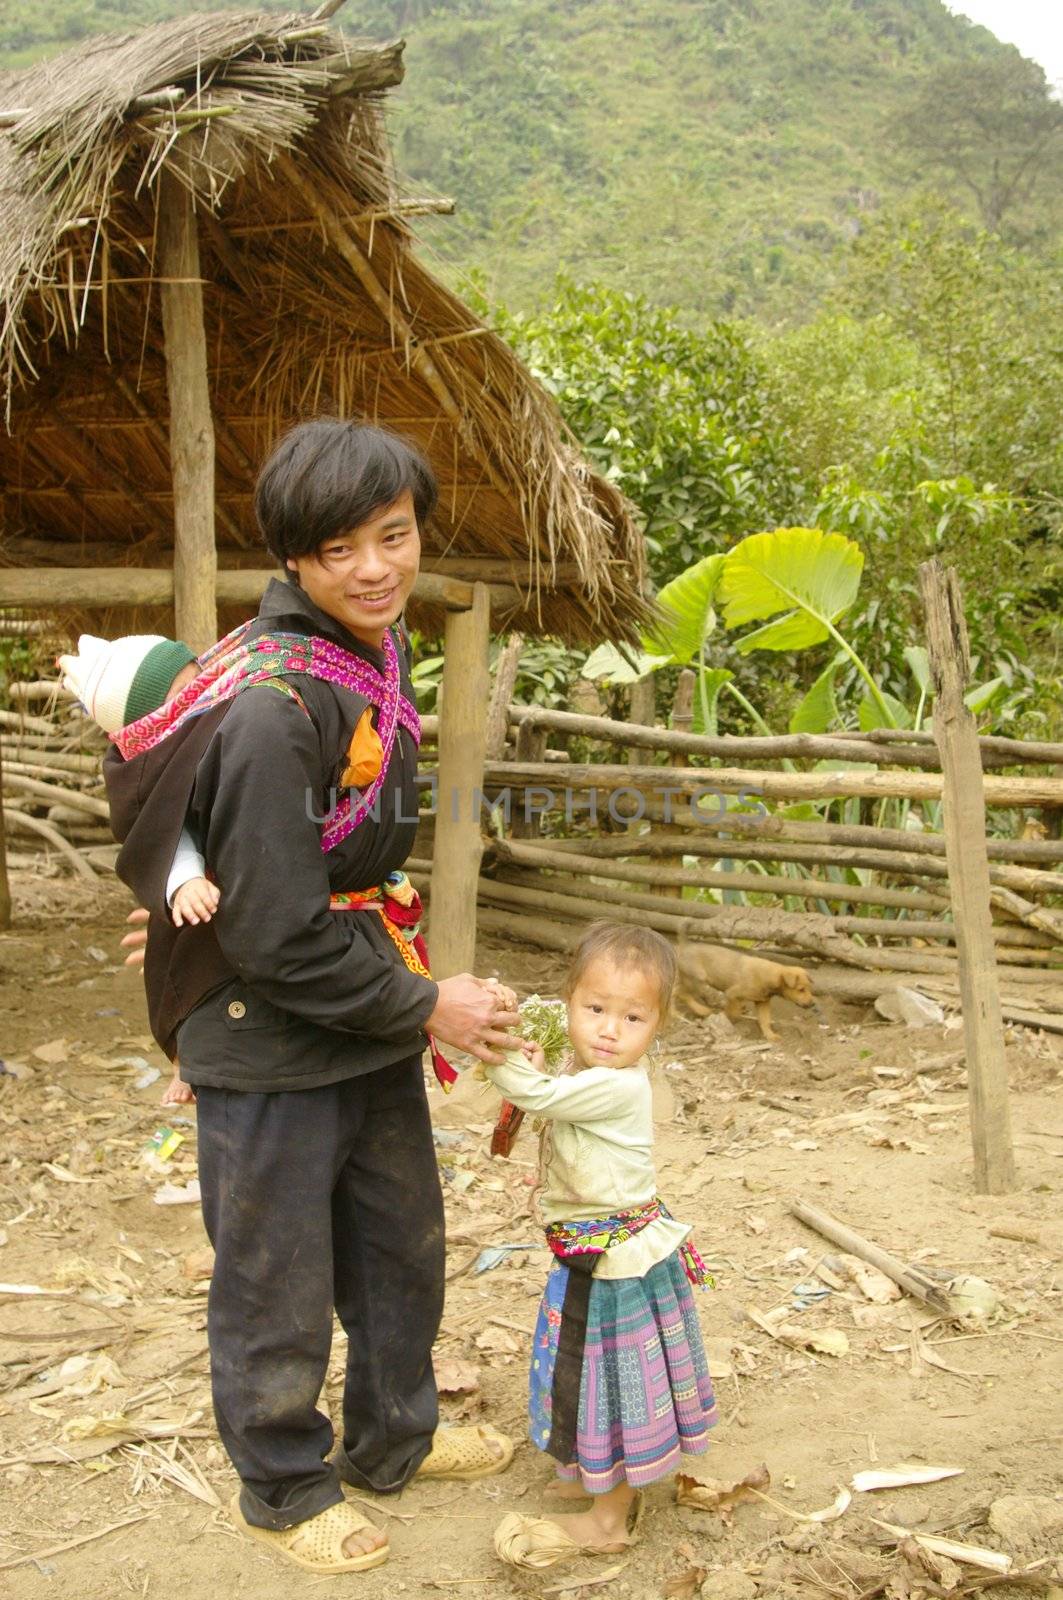 A father Phu La ethnic group by Duroc